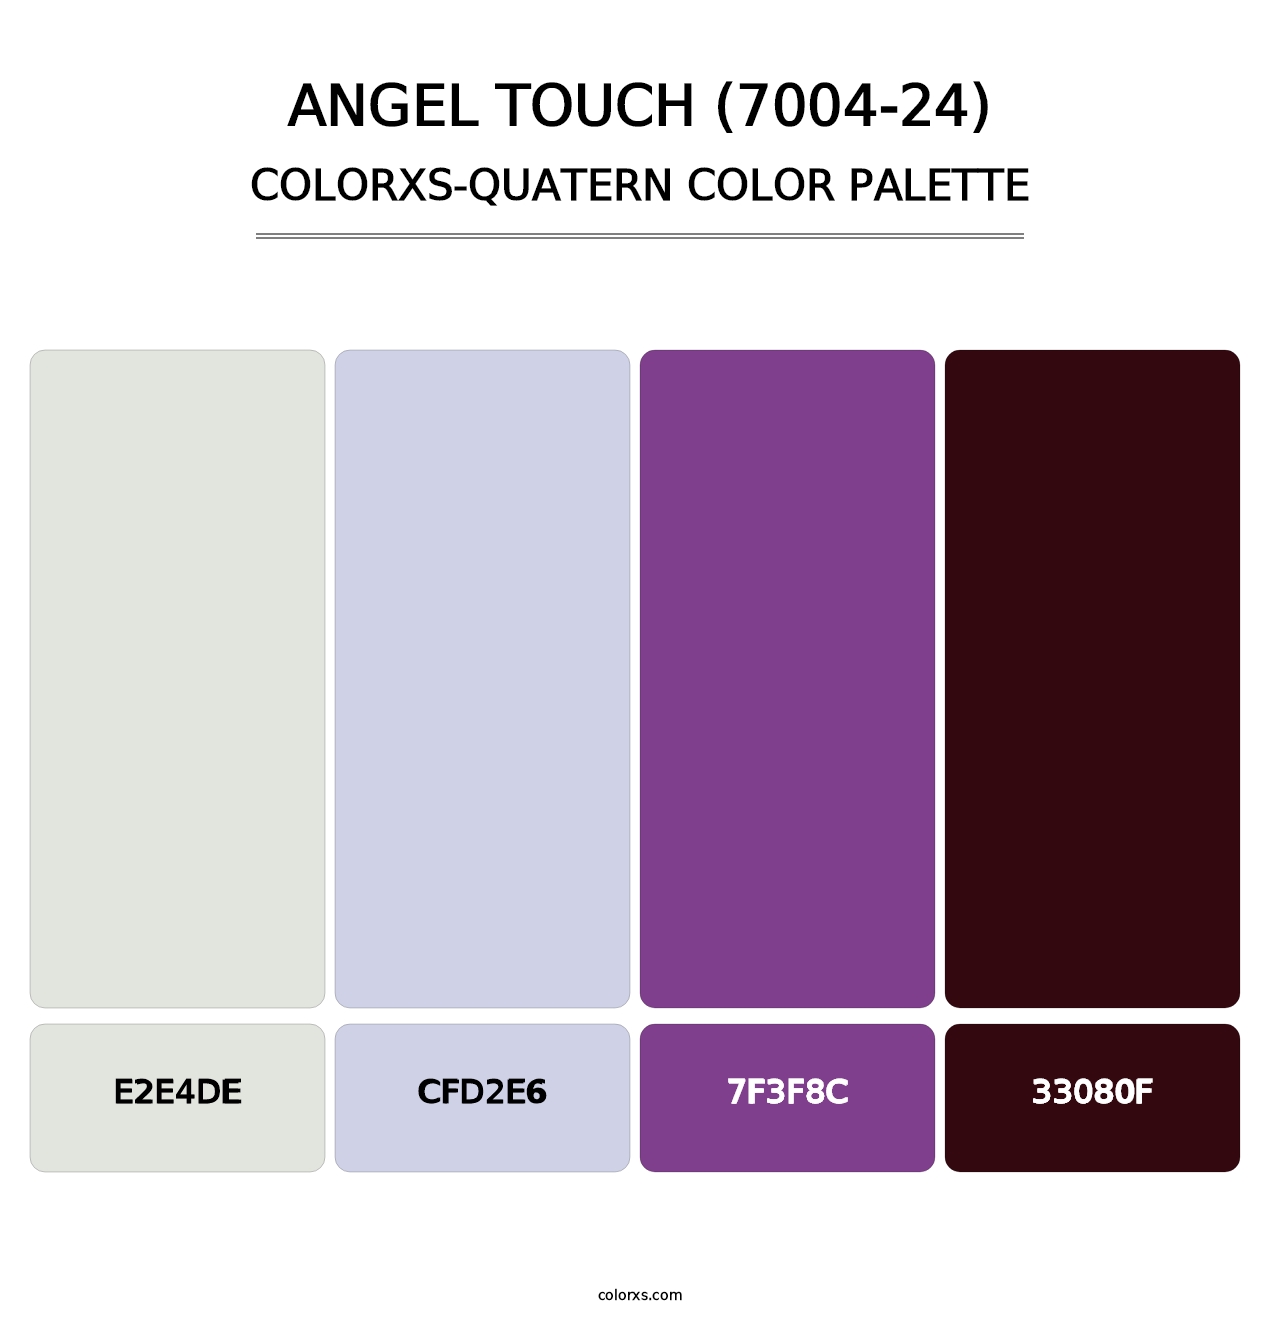 Angel Touch (7004-24) - Colorxs Quatern Palette